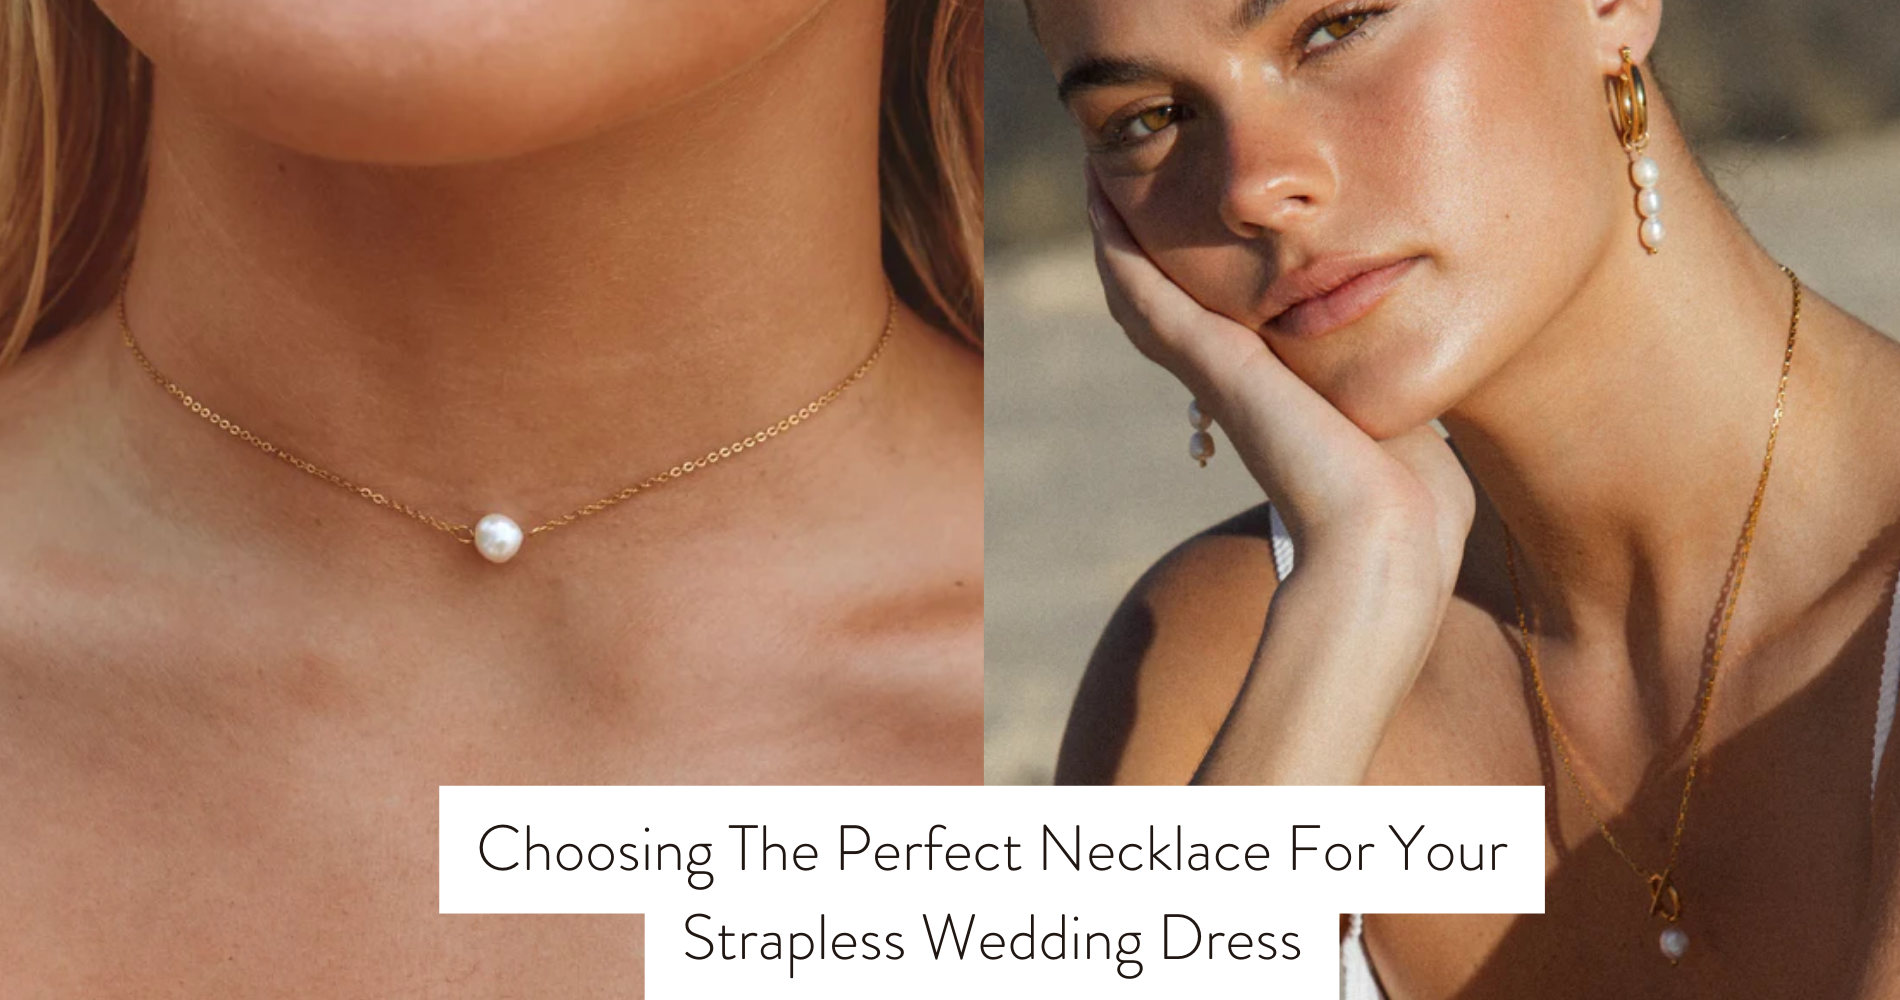 Choosing The Perfect Necklace For Your Strapless Wedding Dress